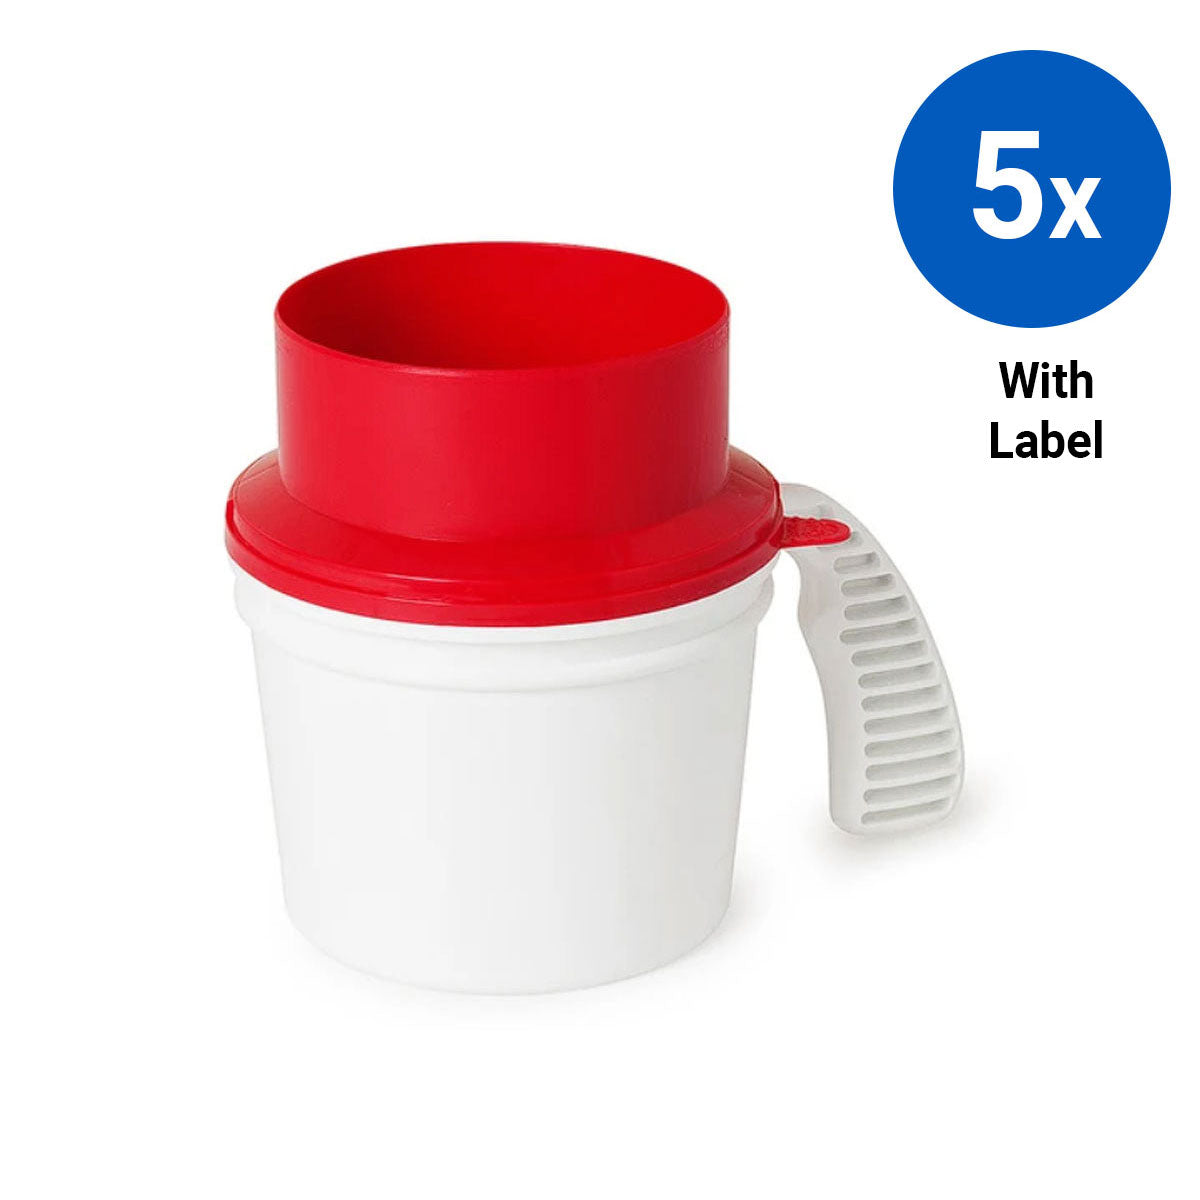 5x Collection Container Base and Quick Drop Lid with Labels - Red